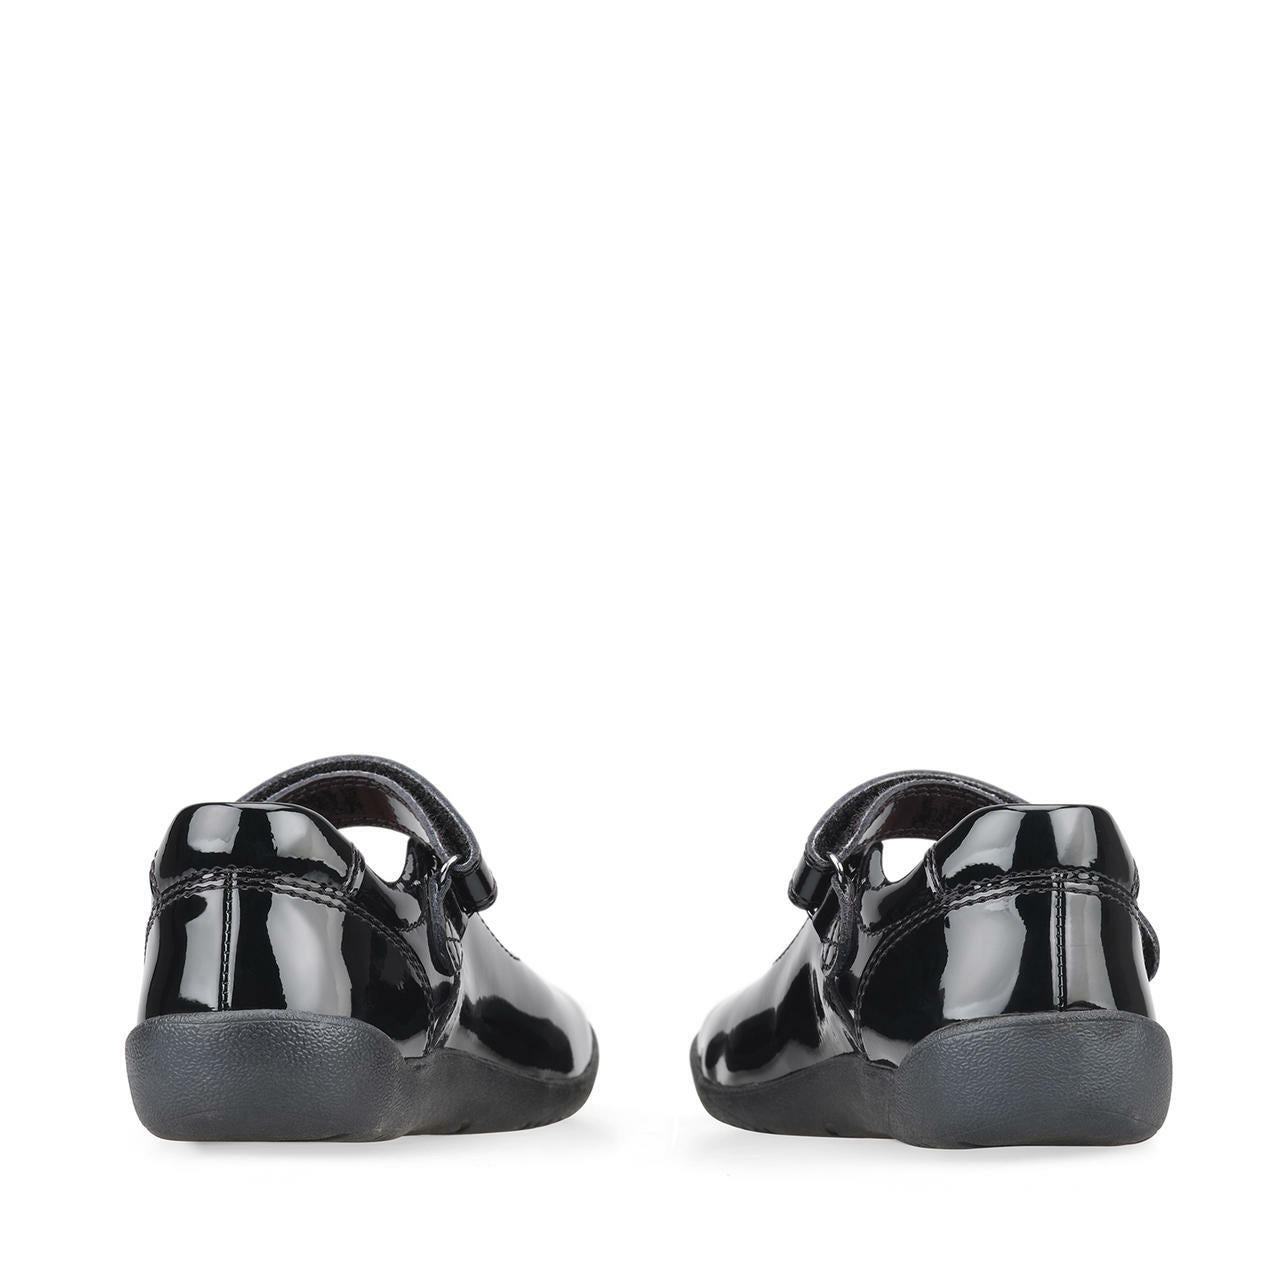 A pair of girls Mary Jane school shoe by Start Rite, style Giggle, in black patent with velcro fastening. Back view.